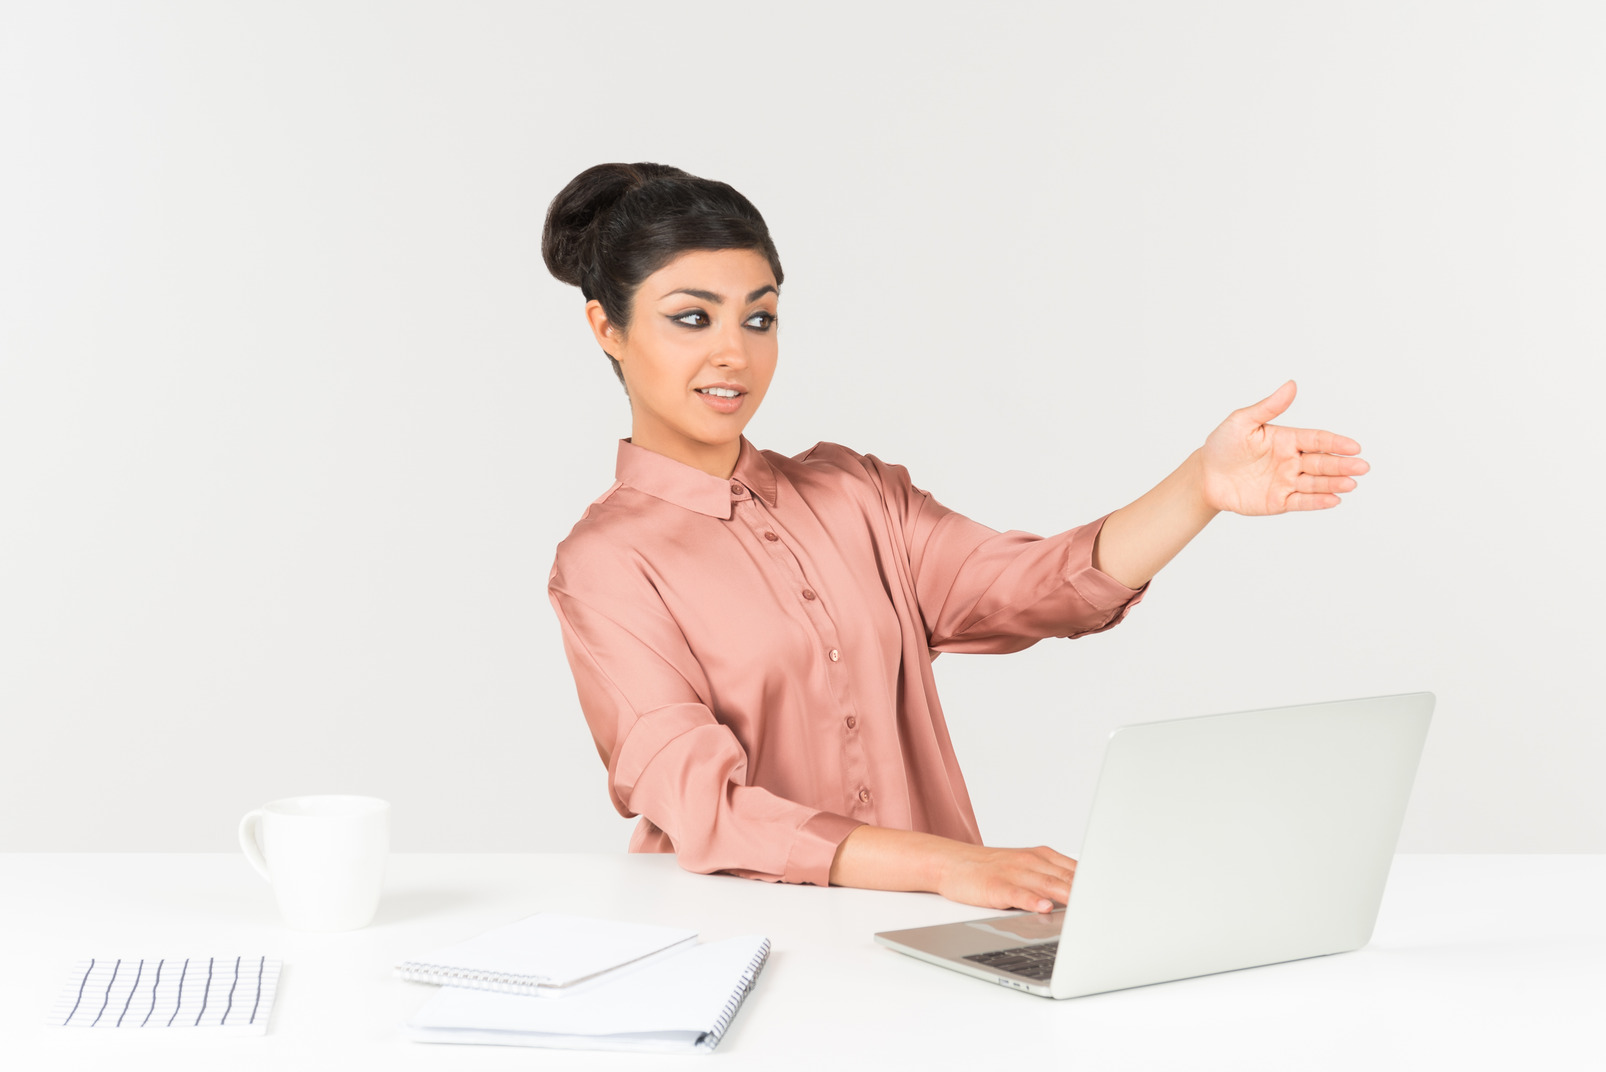 Young indian woman sitting at the office desk and pointing with a hand